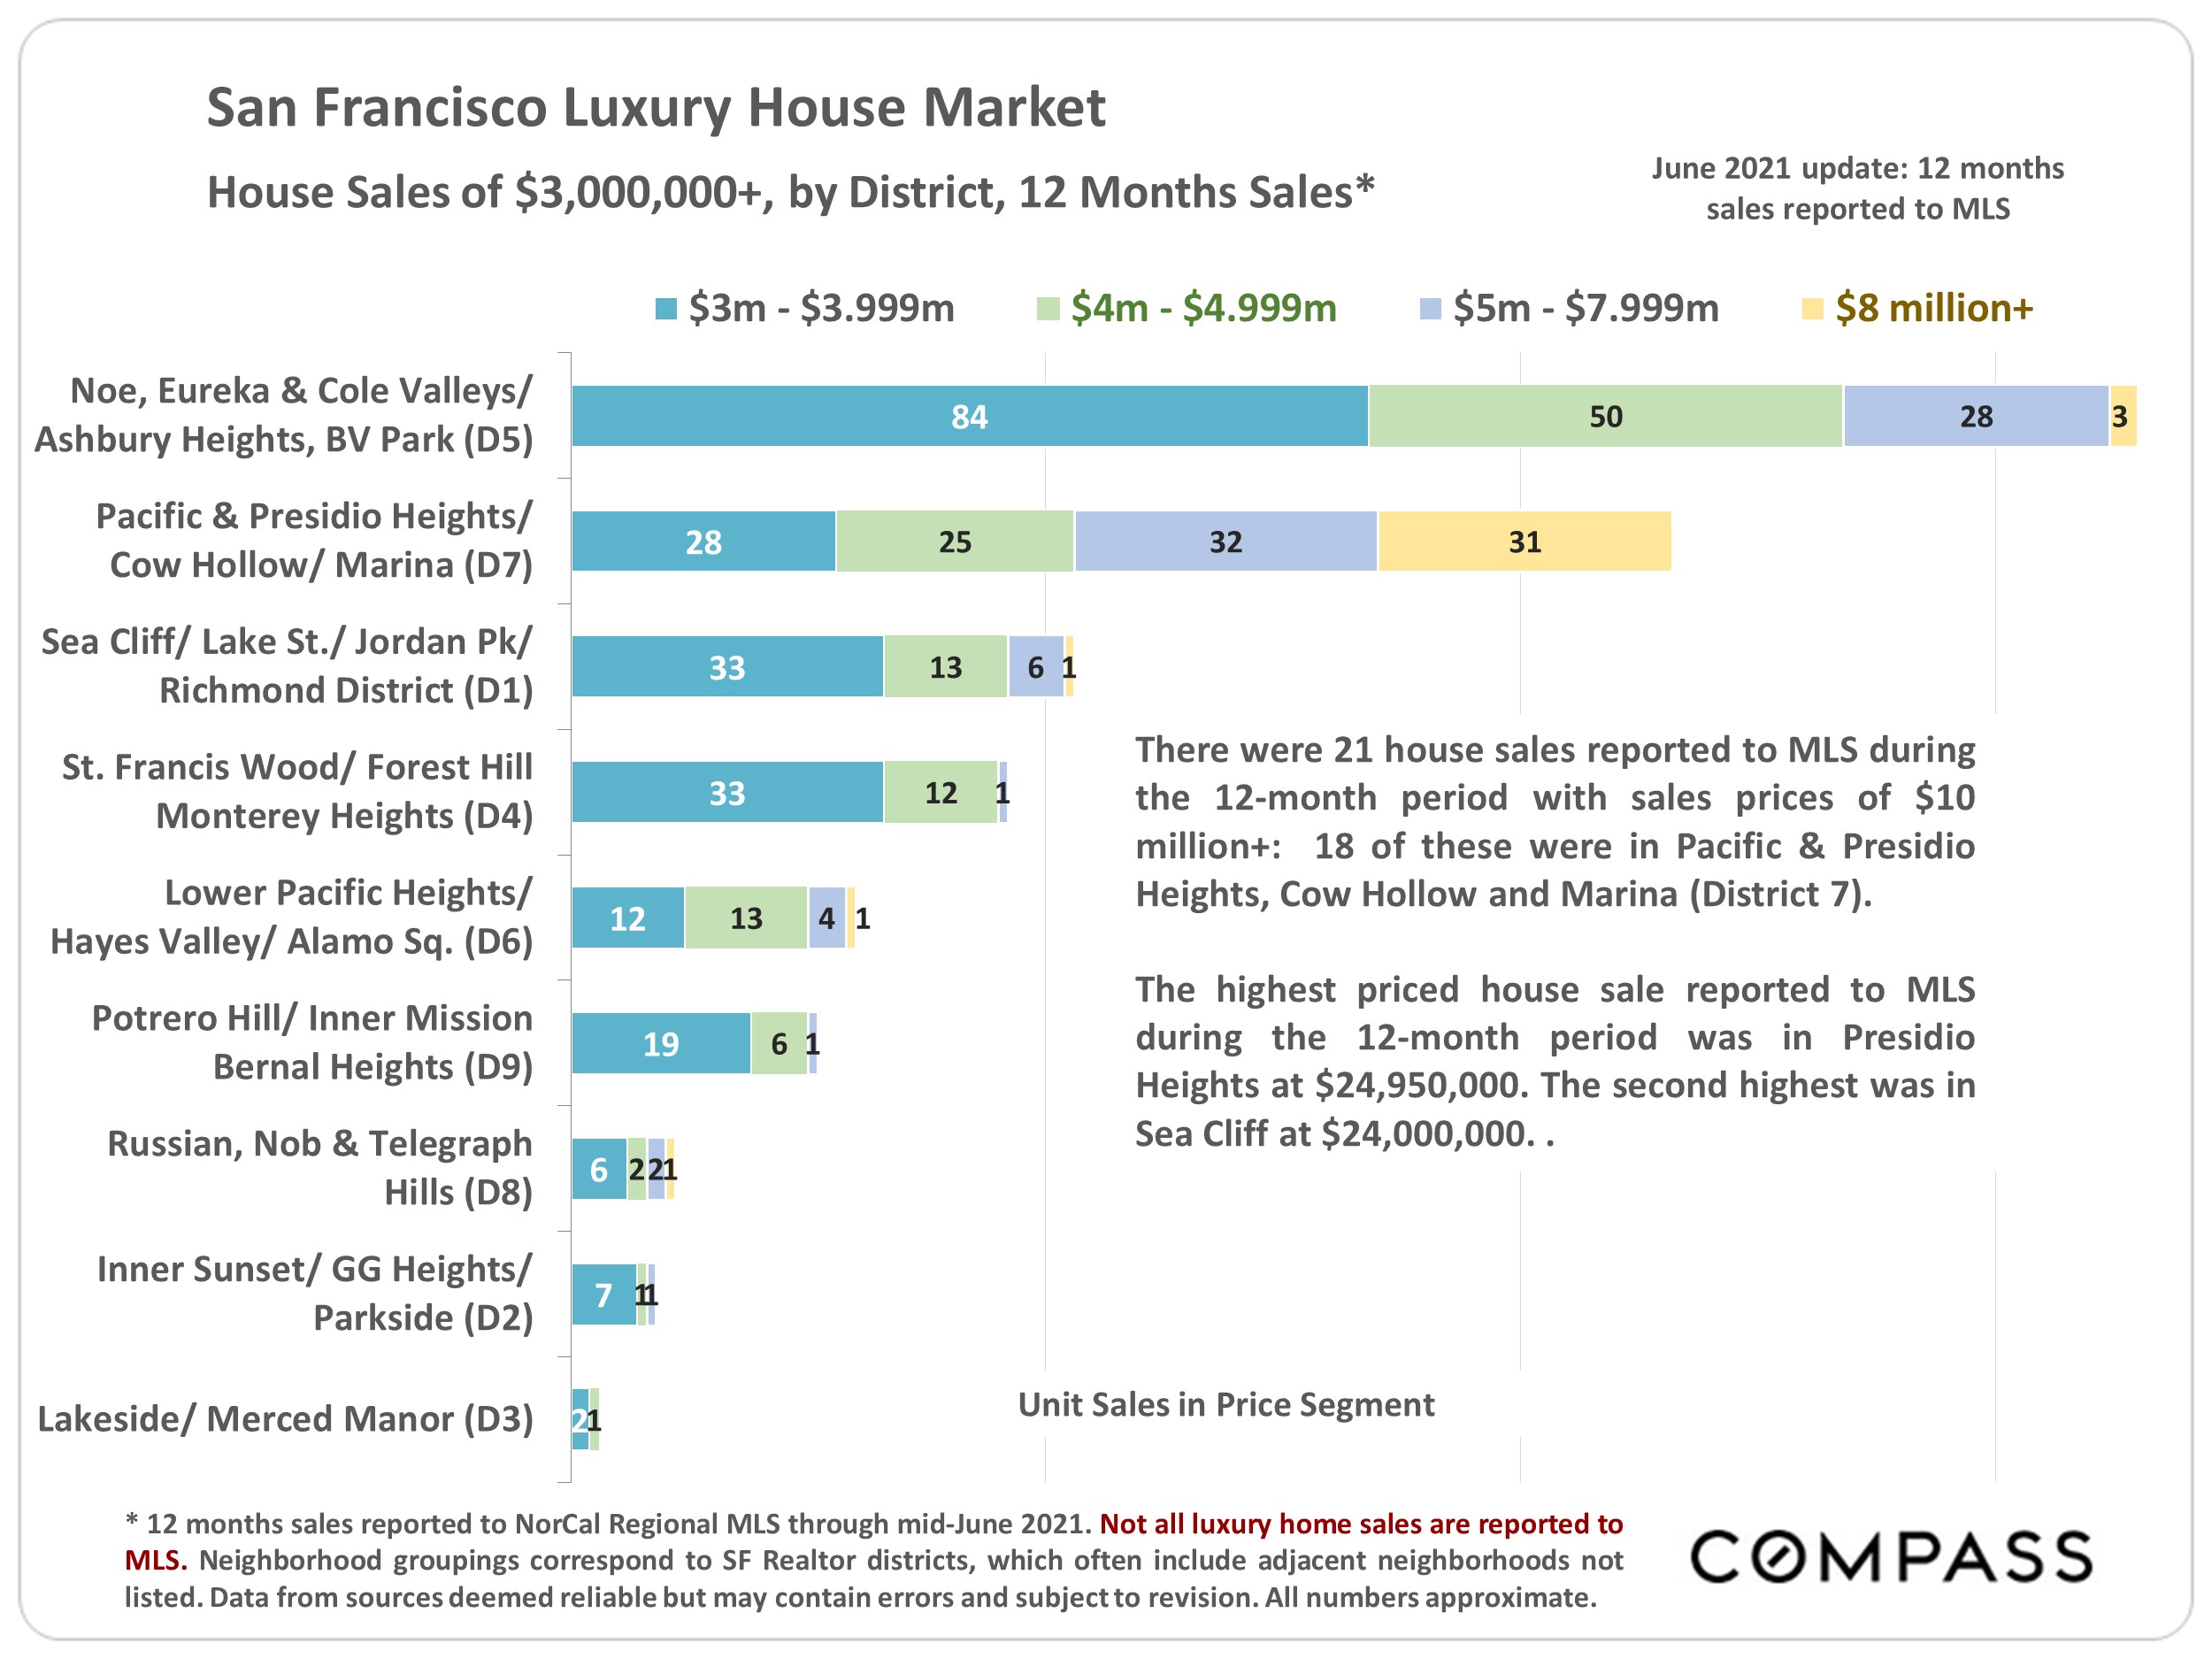 Graph showing San Francisco Luxury House Market with House sales of $3M+, by district over a 12-month period.